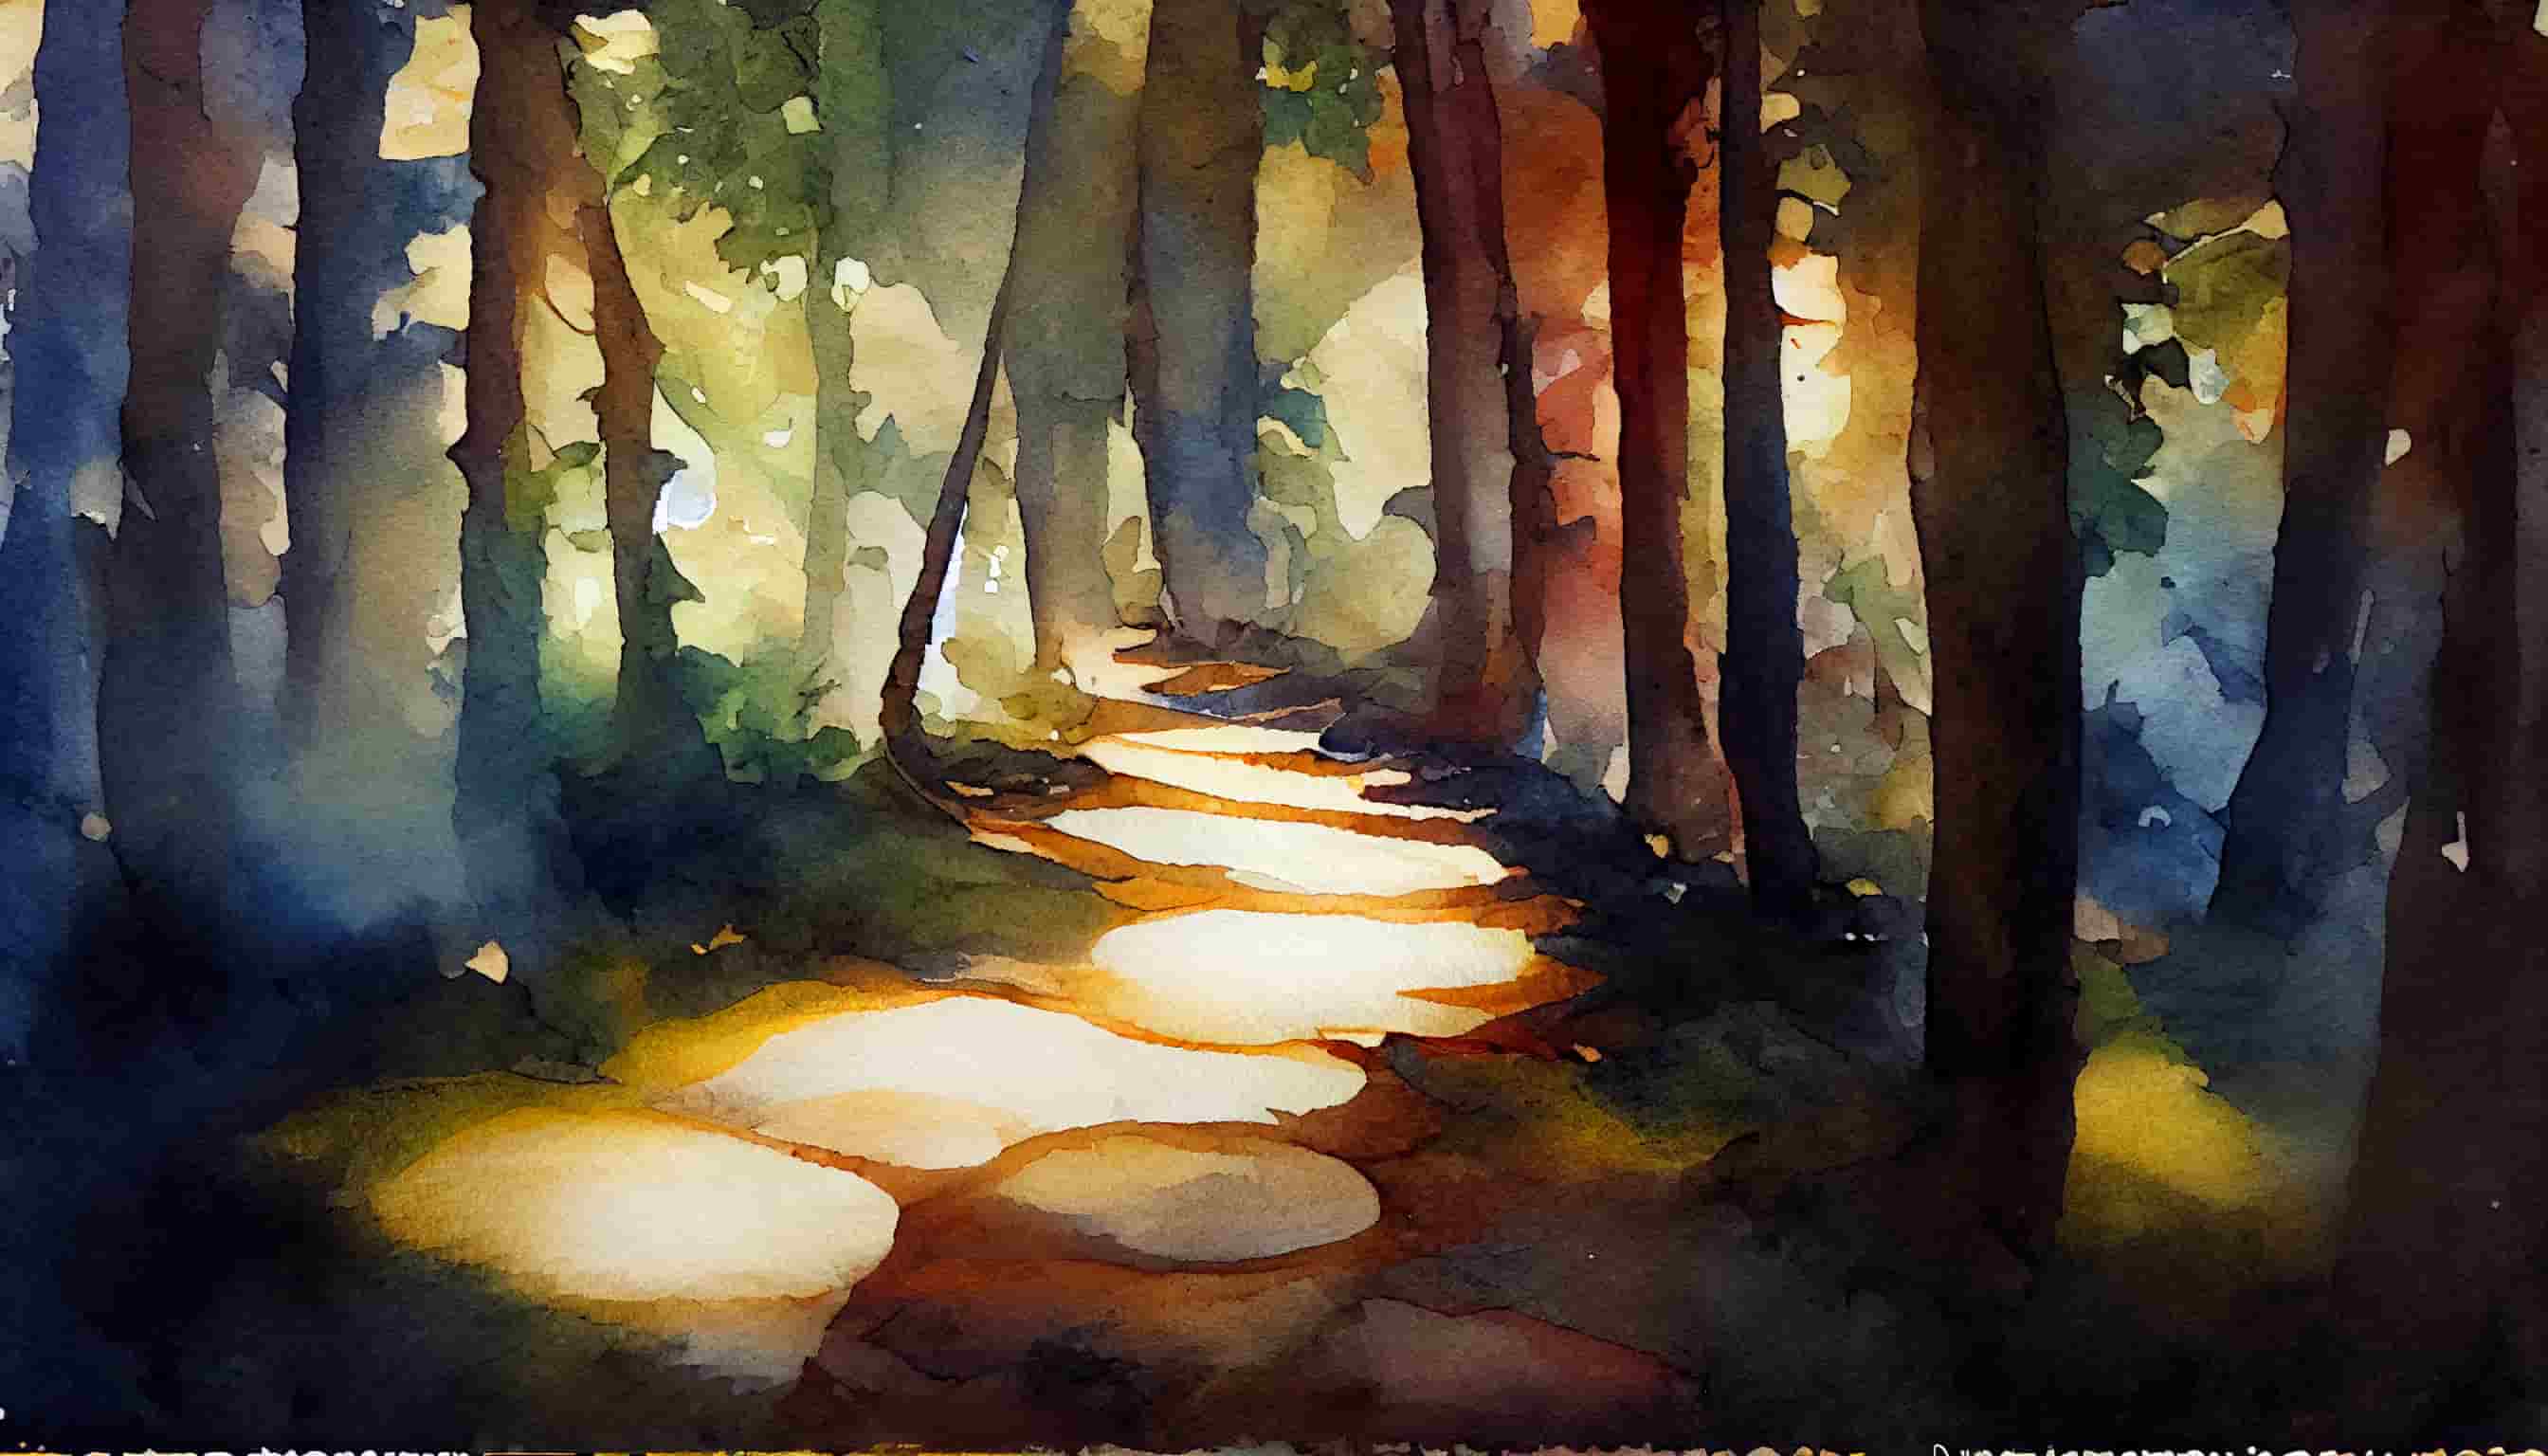 watercolor of a light shining on a forest path with hopeful possibilities